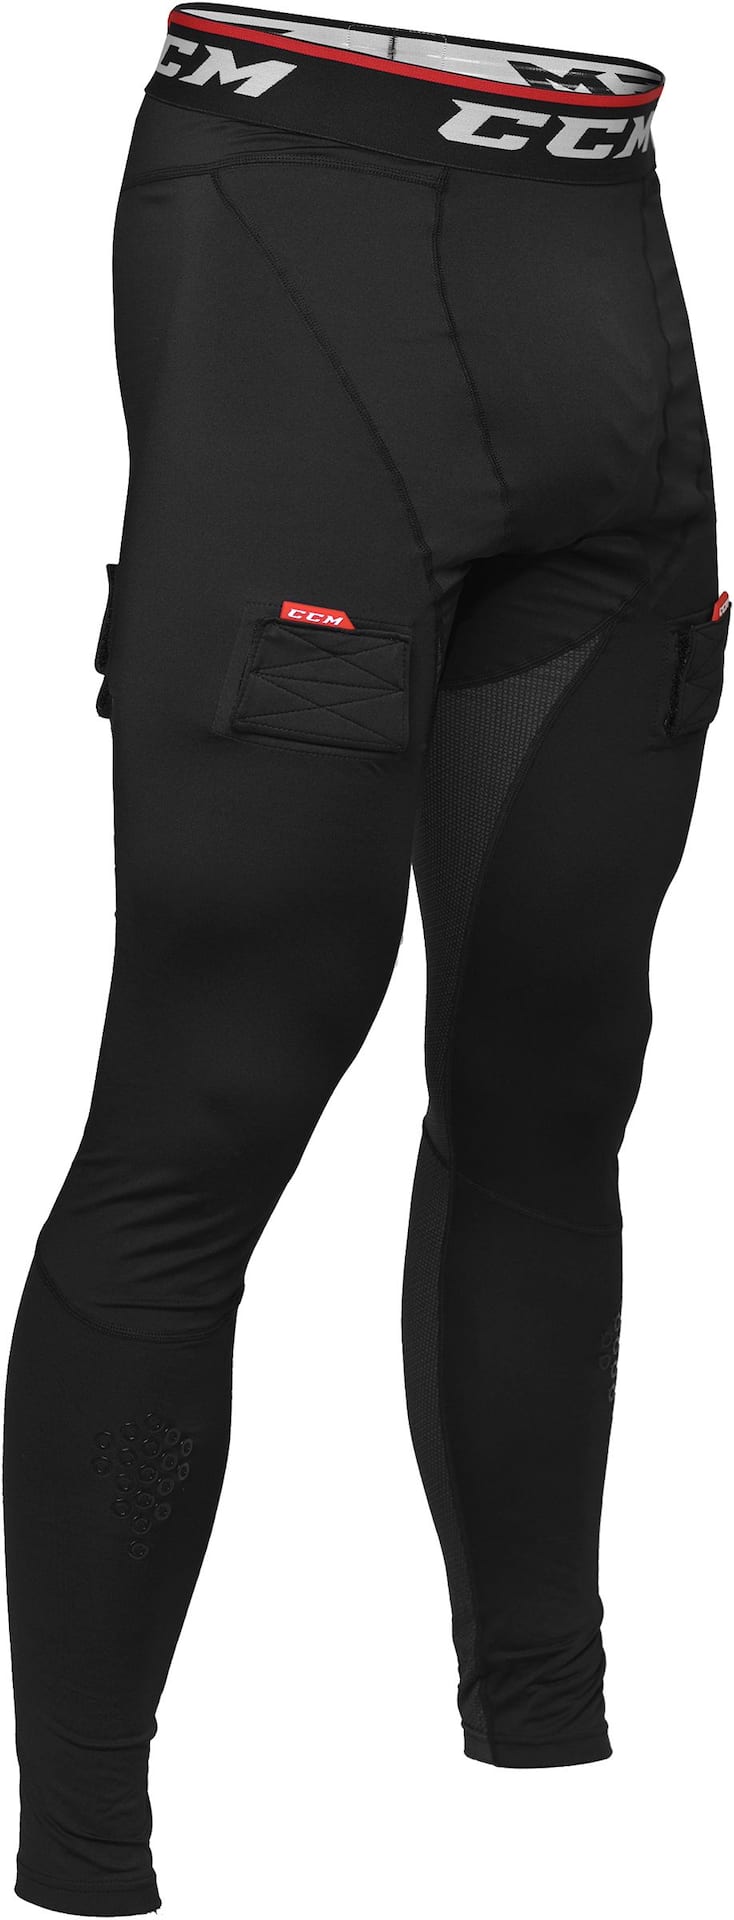 Back to School Sale Therma-FIT Bottoms Tights & Leggings.